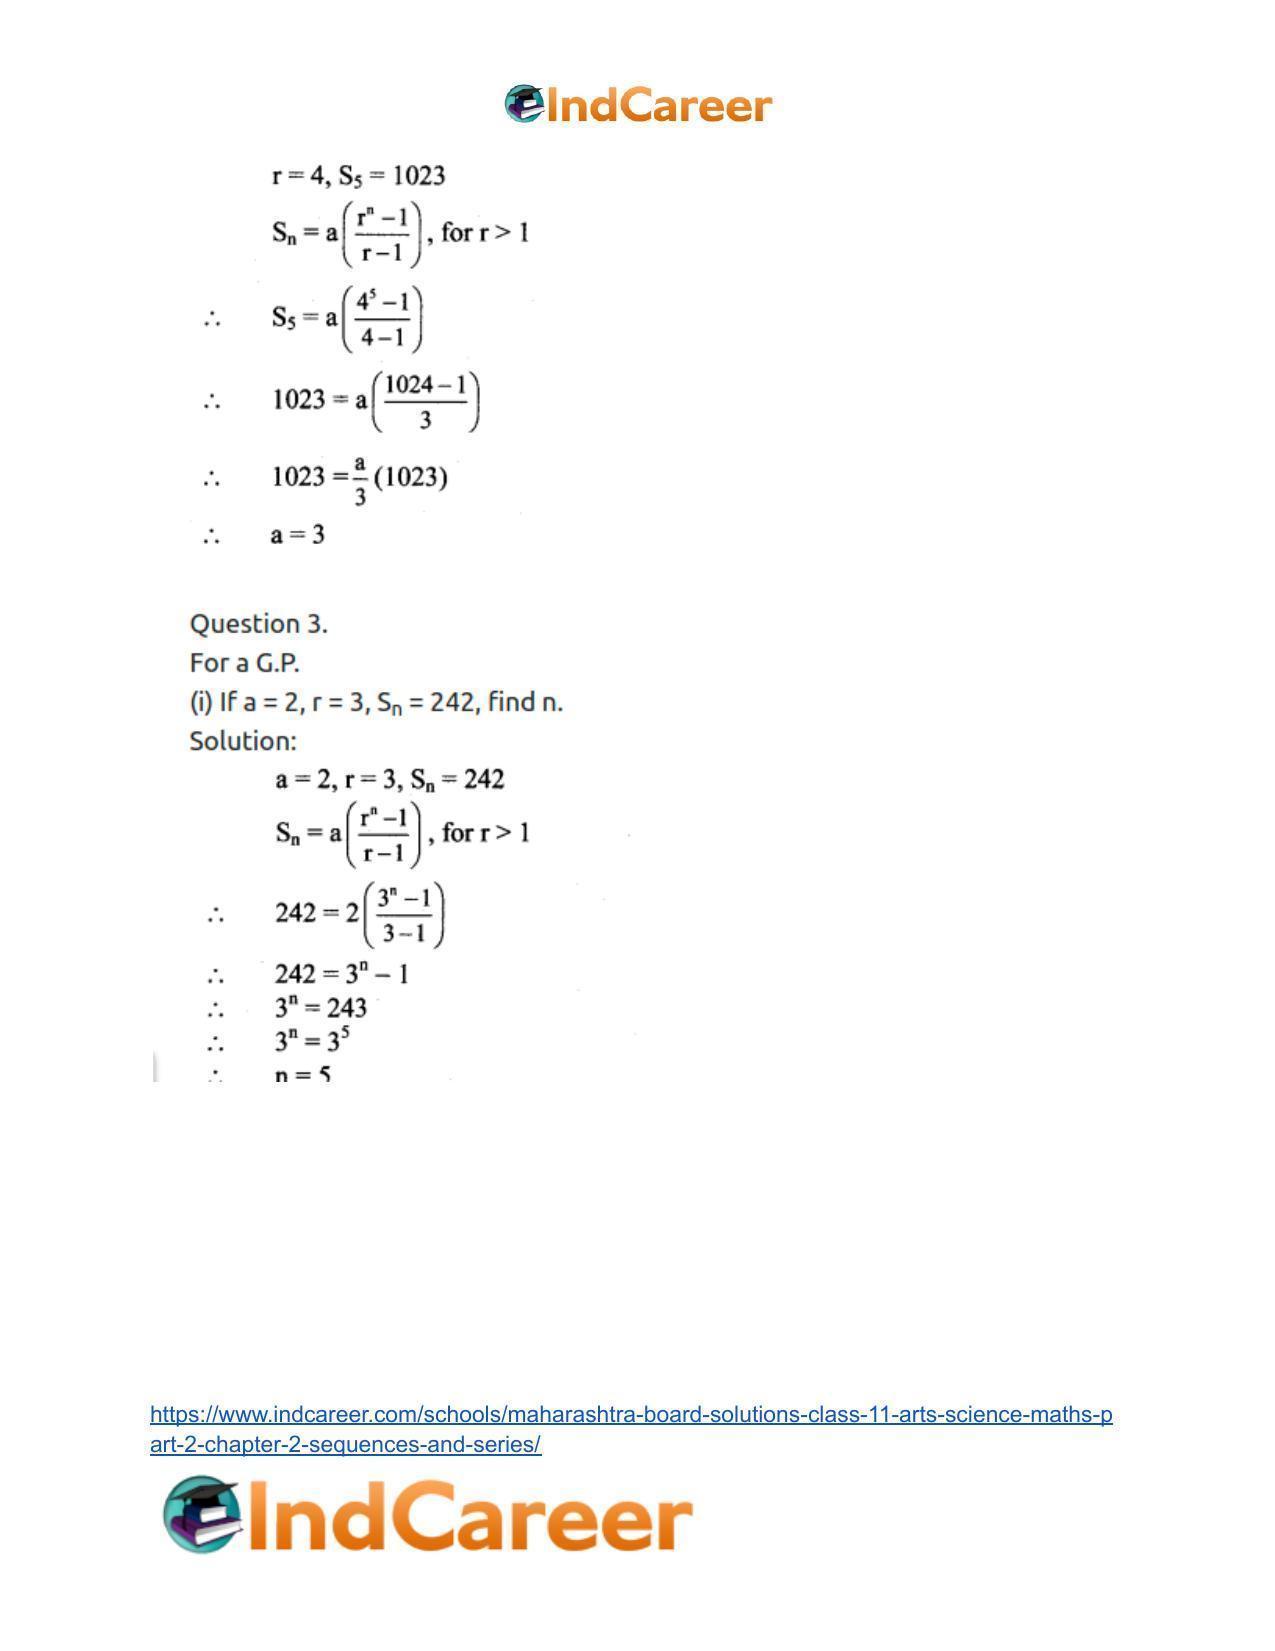 Maharashtra Board Solutions Class 11-Arts & Science Maths (Part 2): Chapter 2- Sequences and Series - Page 25